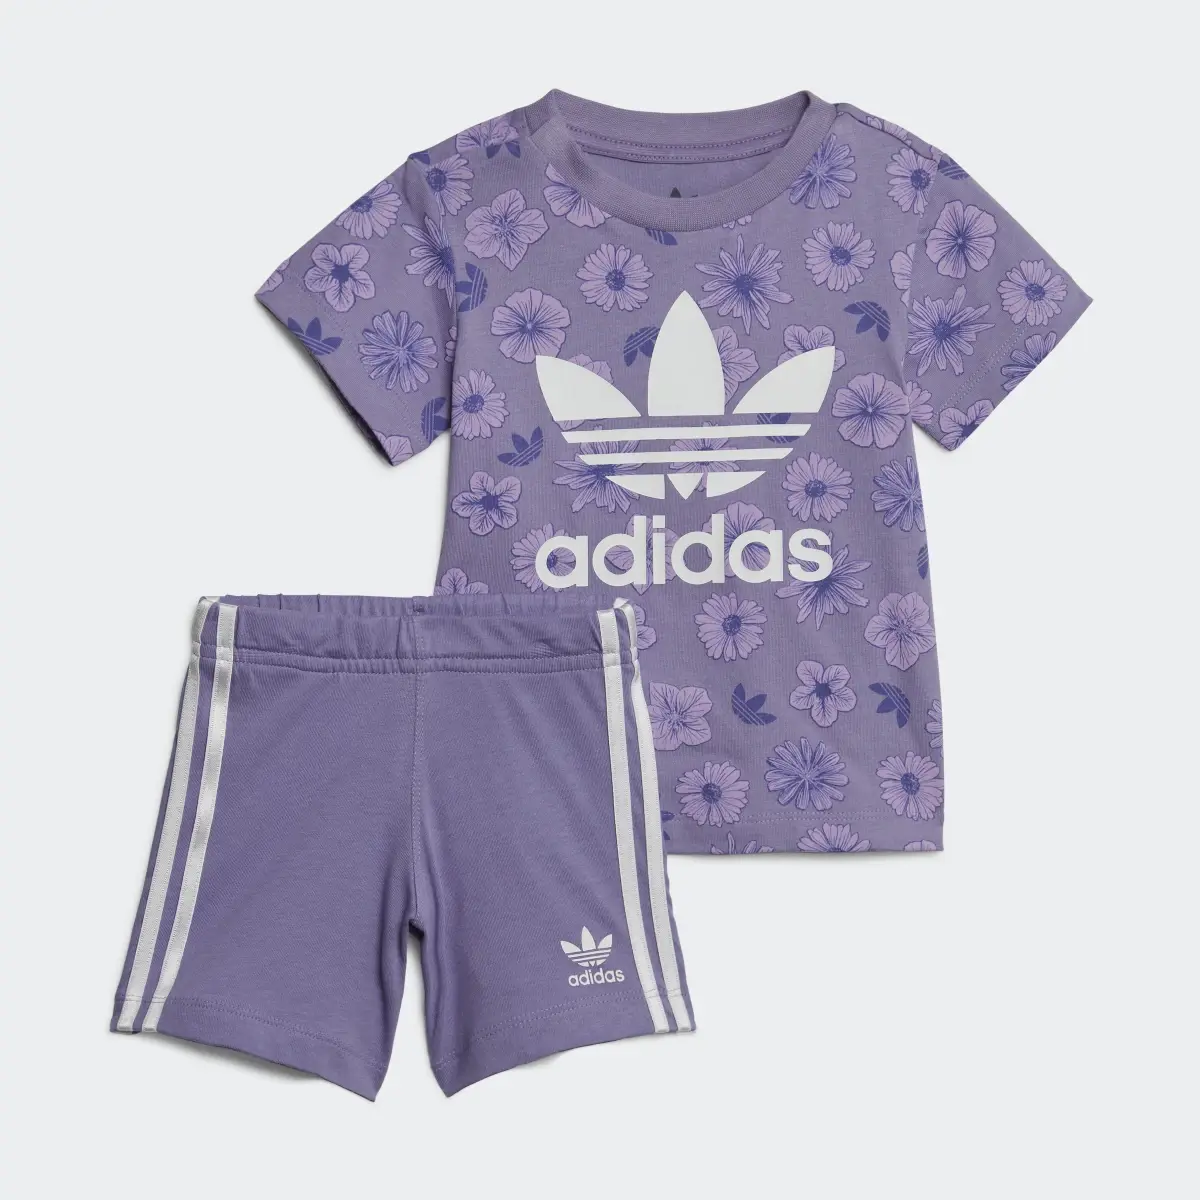 Adidas Completo Floral Tee and Shorts. 2